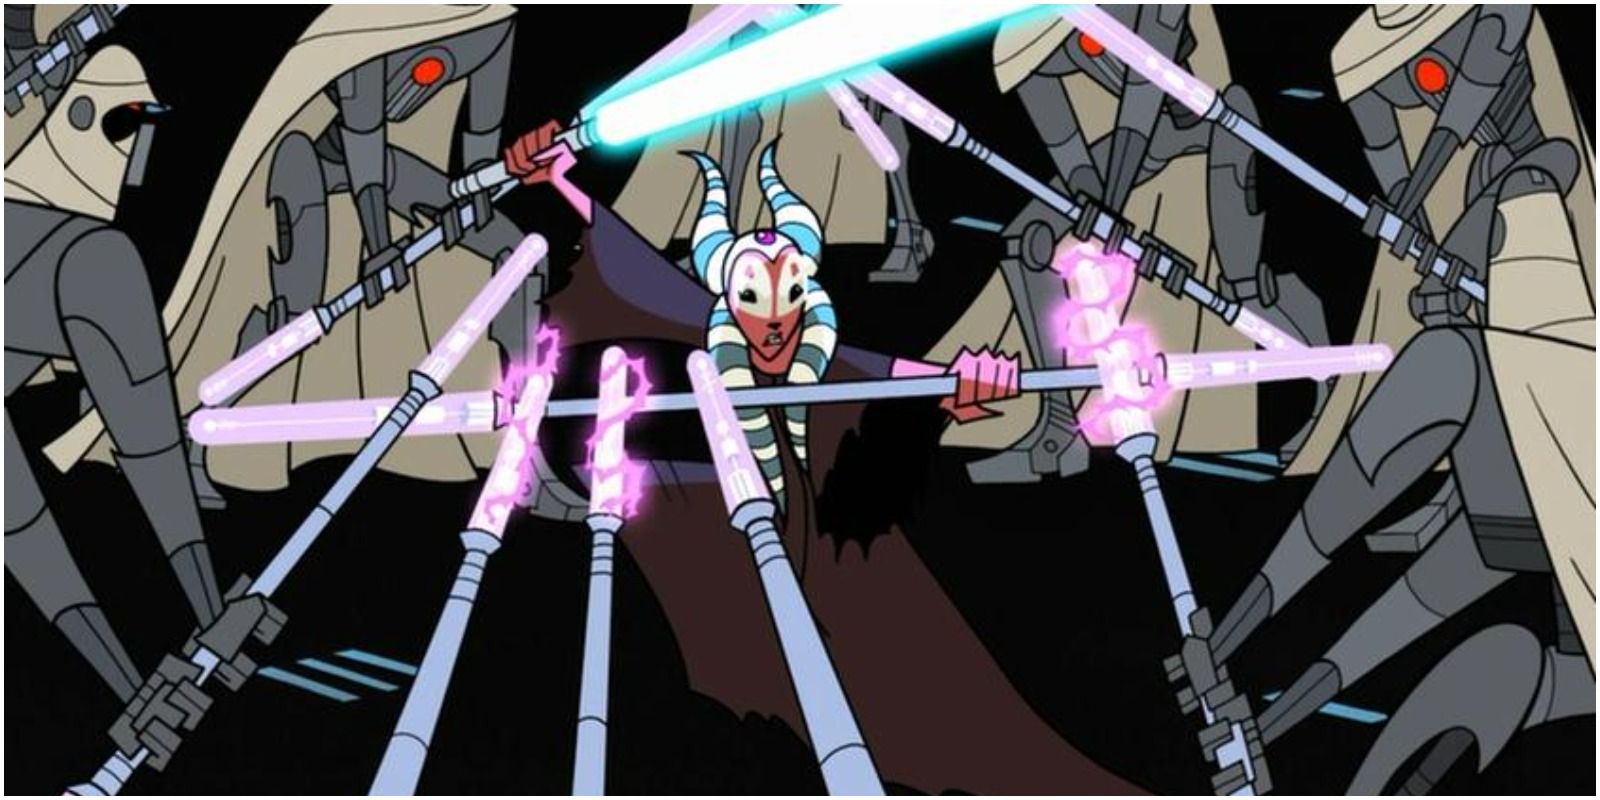 Shaak Ti dueling Mangaguards with a staff and lightsaber in Star Wars: Clone Wars